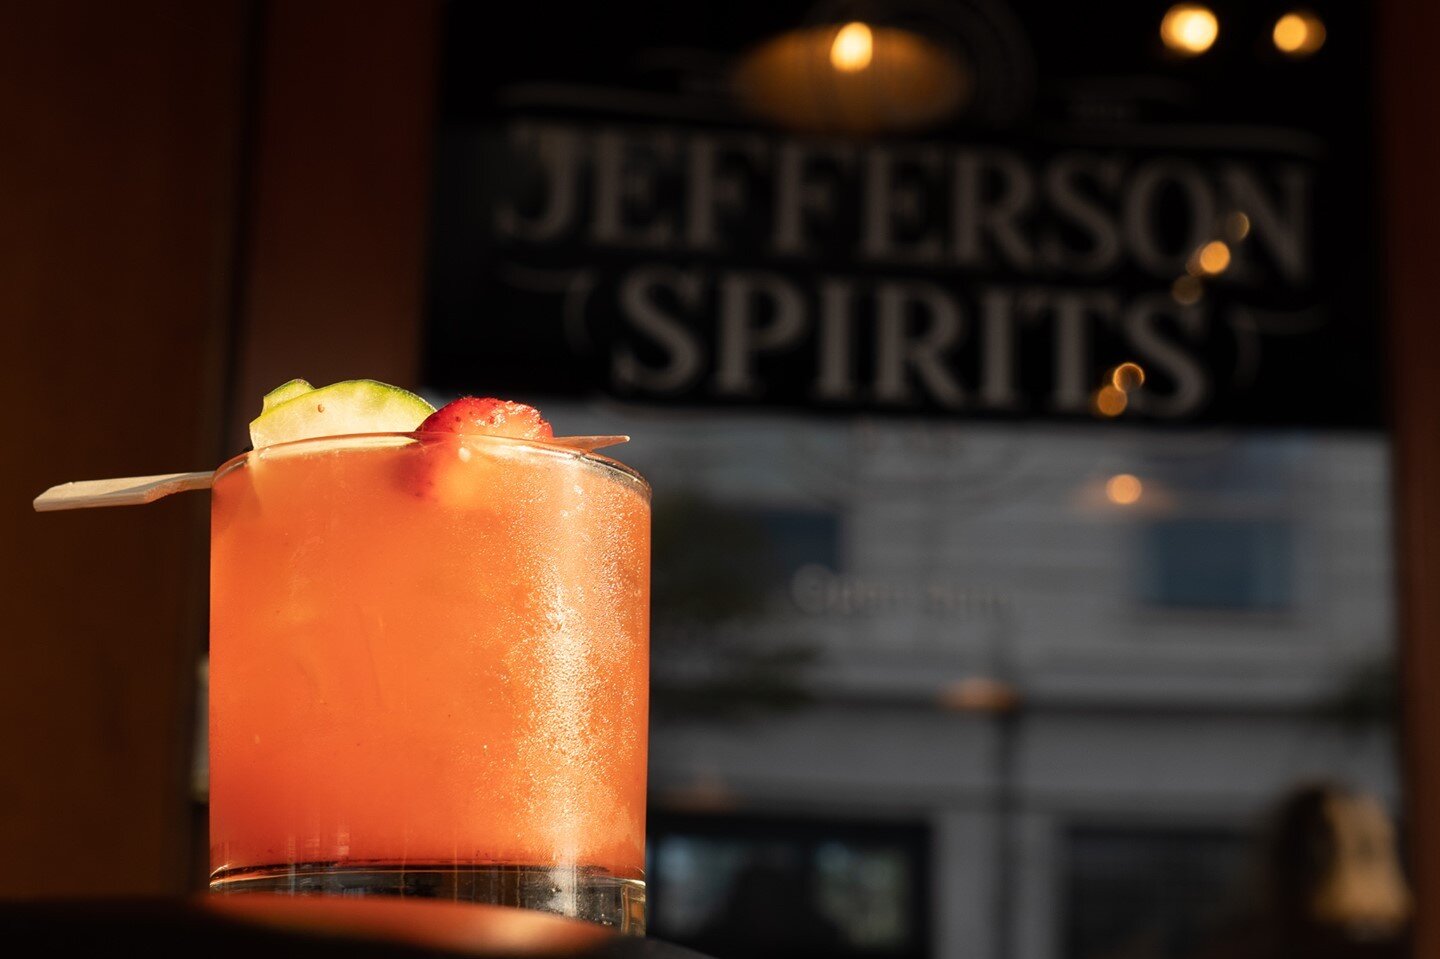 Is it happy hour yet?  Plan on being here 4-6 tonight and try one of our happy hour cocktails, or let one of our fantastic bartenders make you up one of their own concoctions!  Let's come together tonight at Jefferson Spirits!  Cheers!